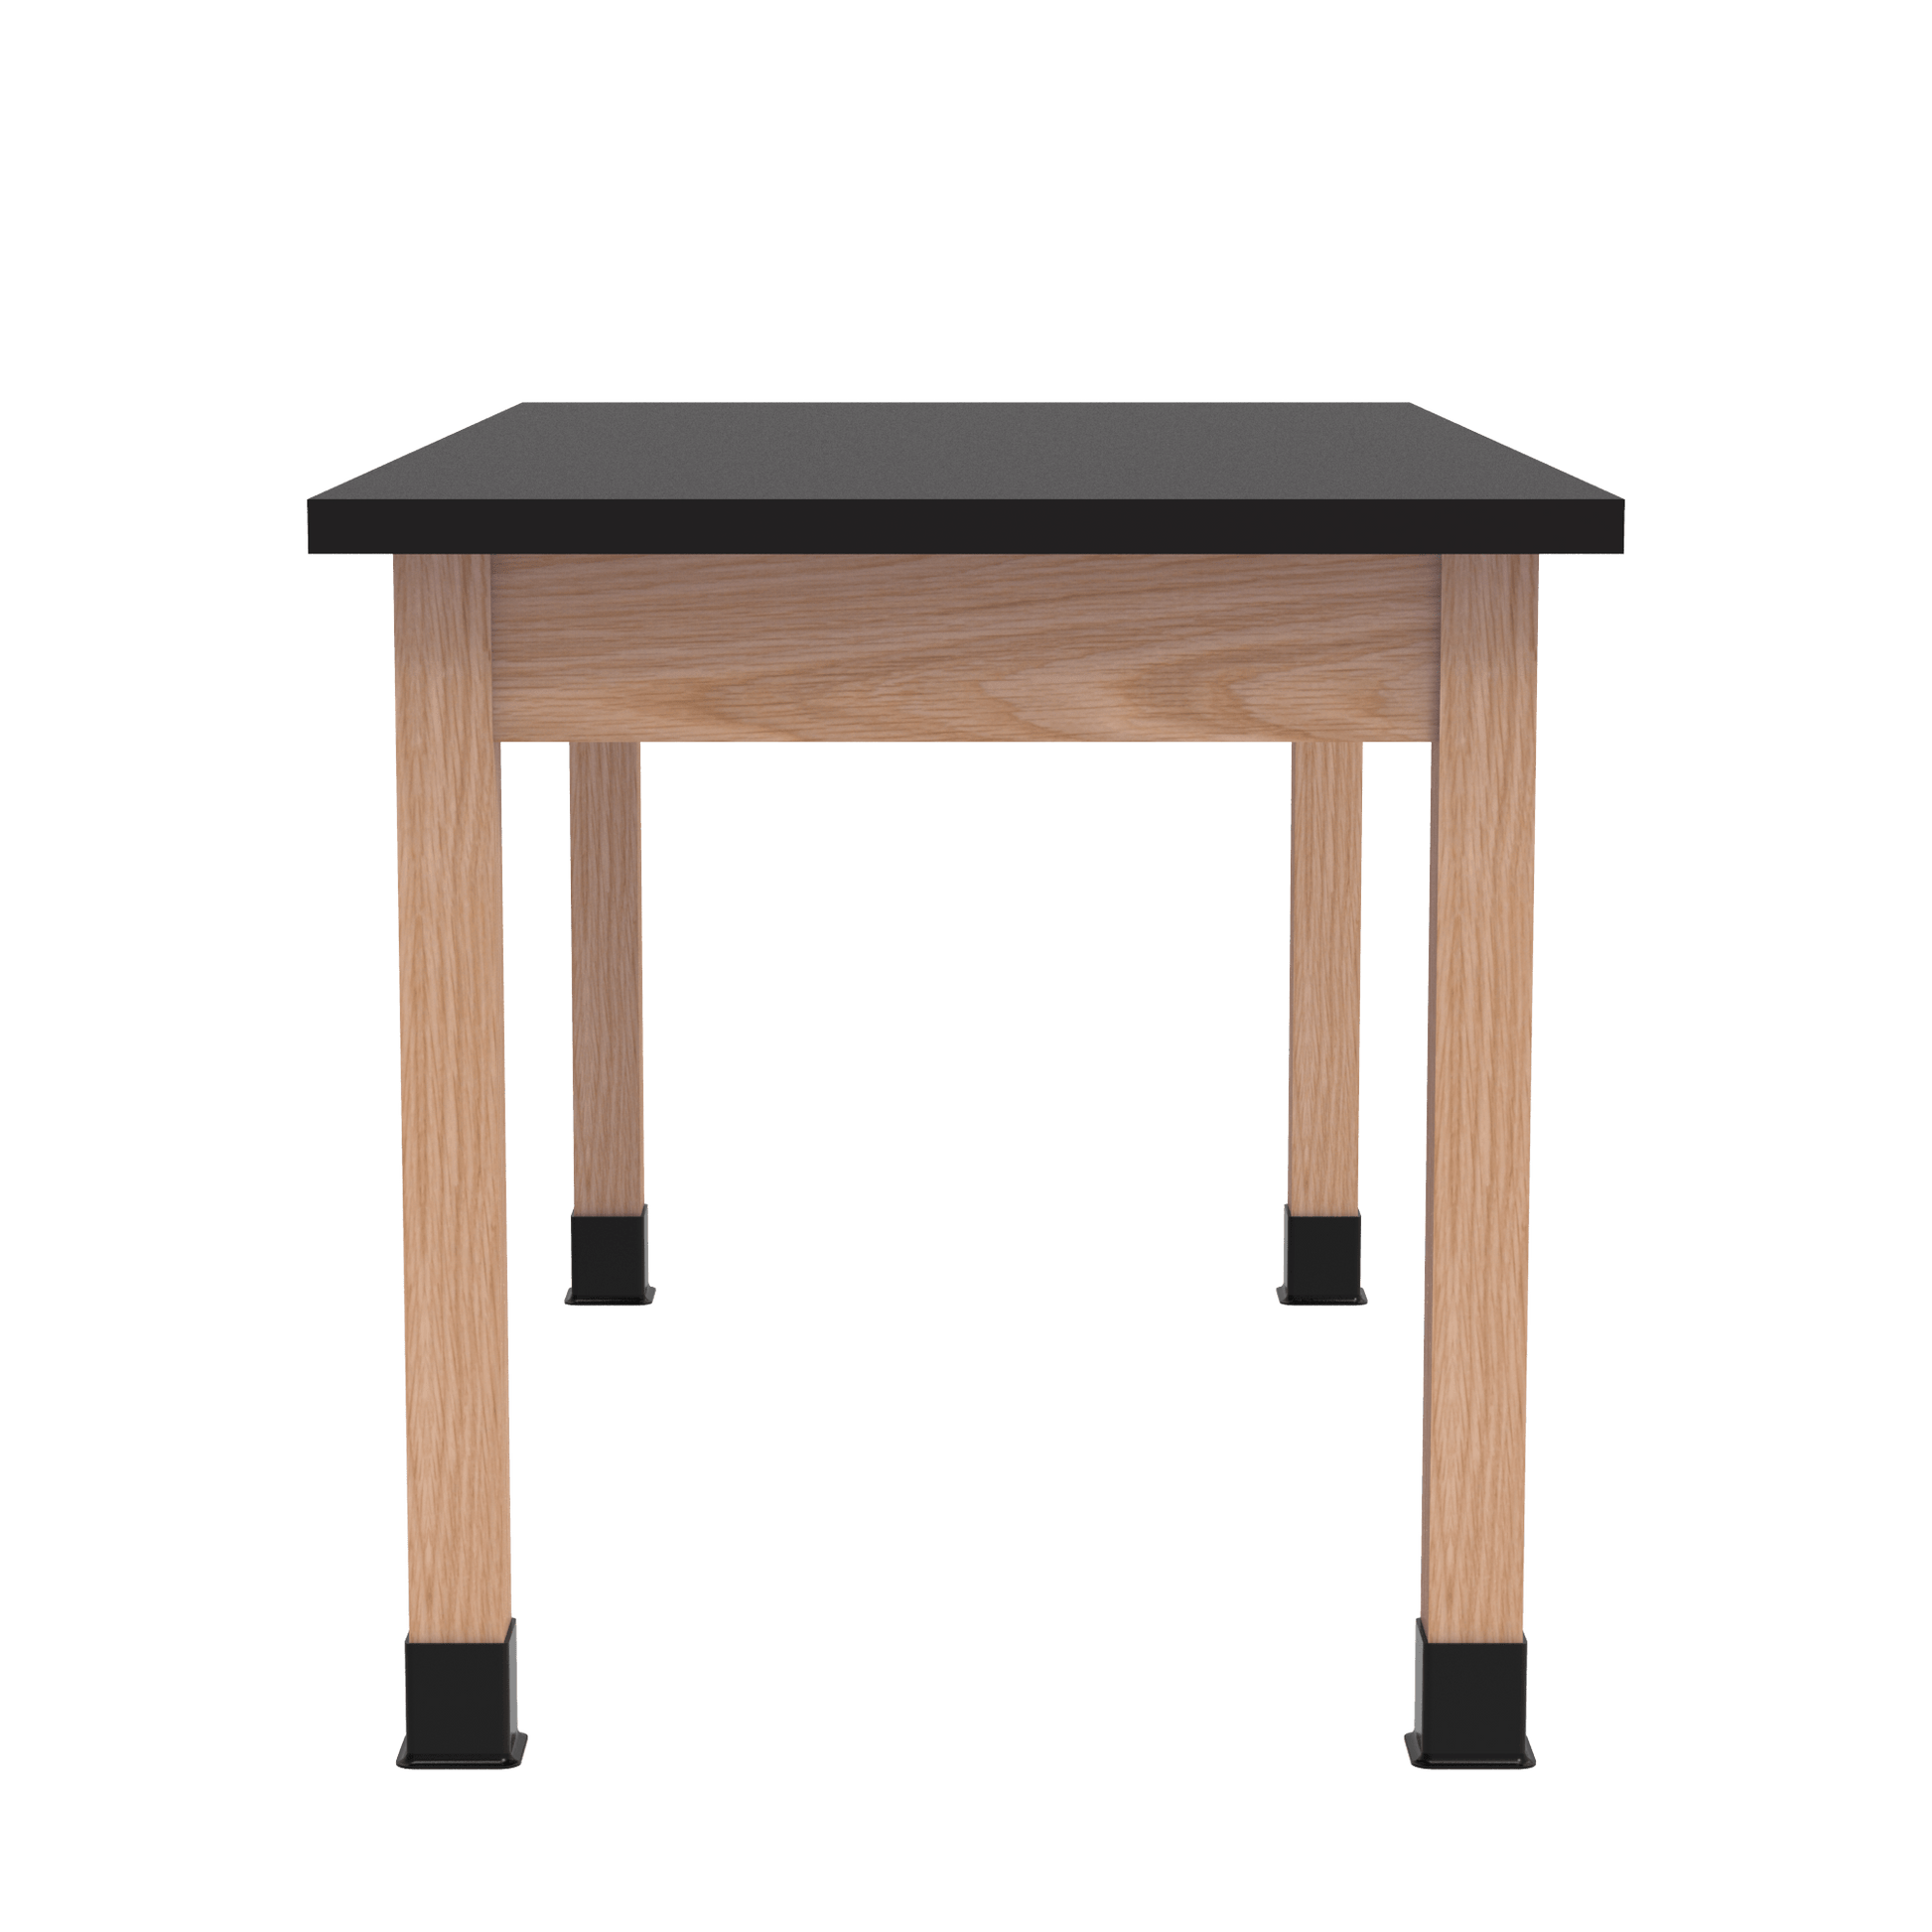 Diversified Woodcrafts Science Table w/ Book Compartment - 60" W x 36" D - Solid Oak Frame and Adjustable Glides - SchoolOutlet